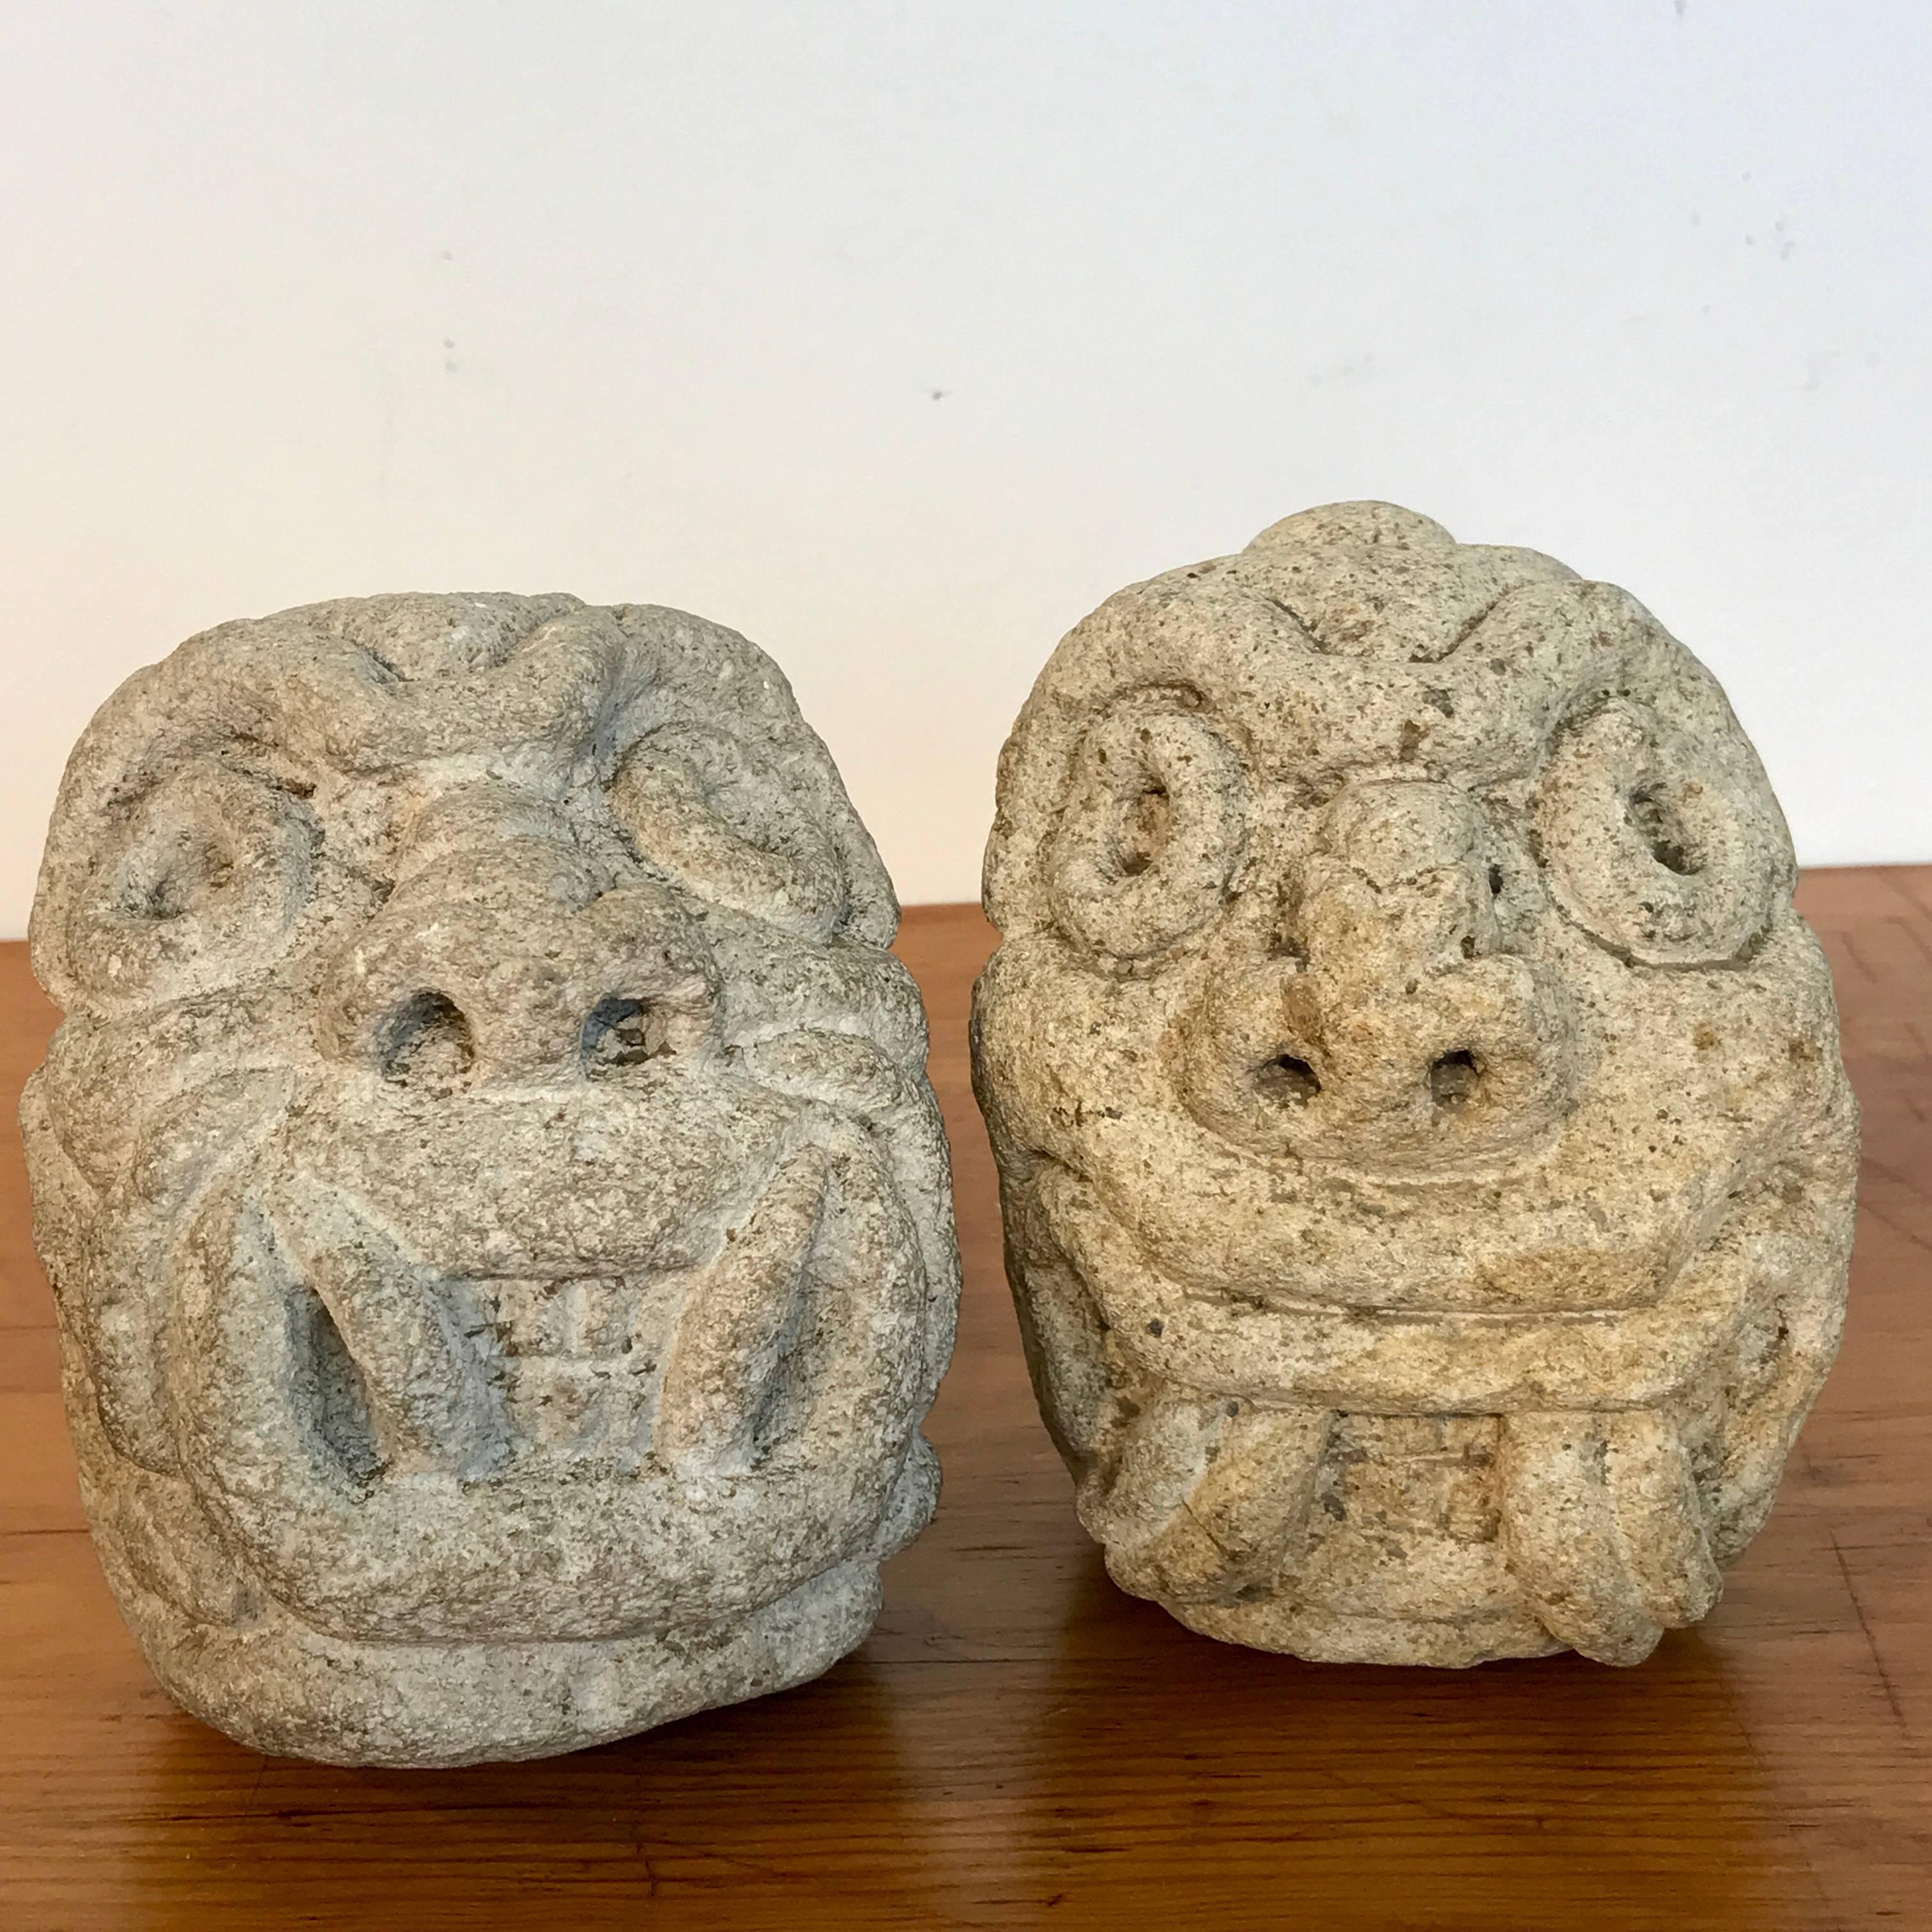 Two carved Mayan deity limestone architectural carvings or / elements, 19th century or older
The larger measures 7